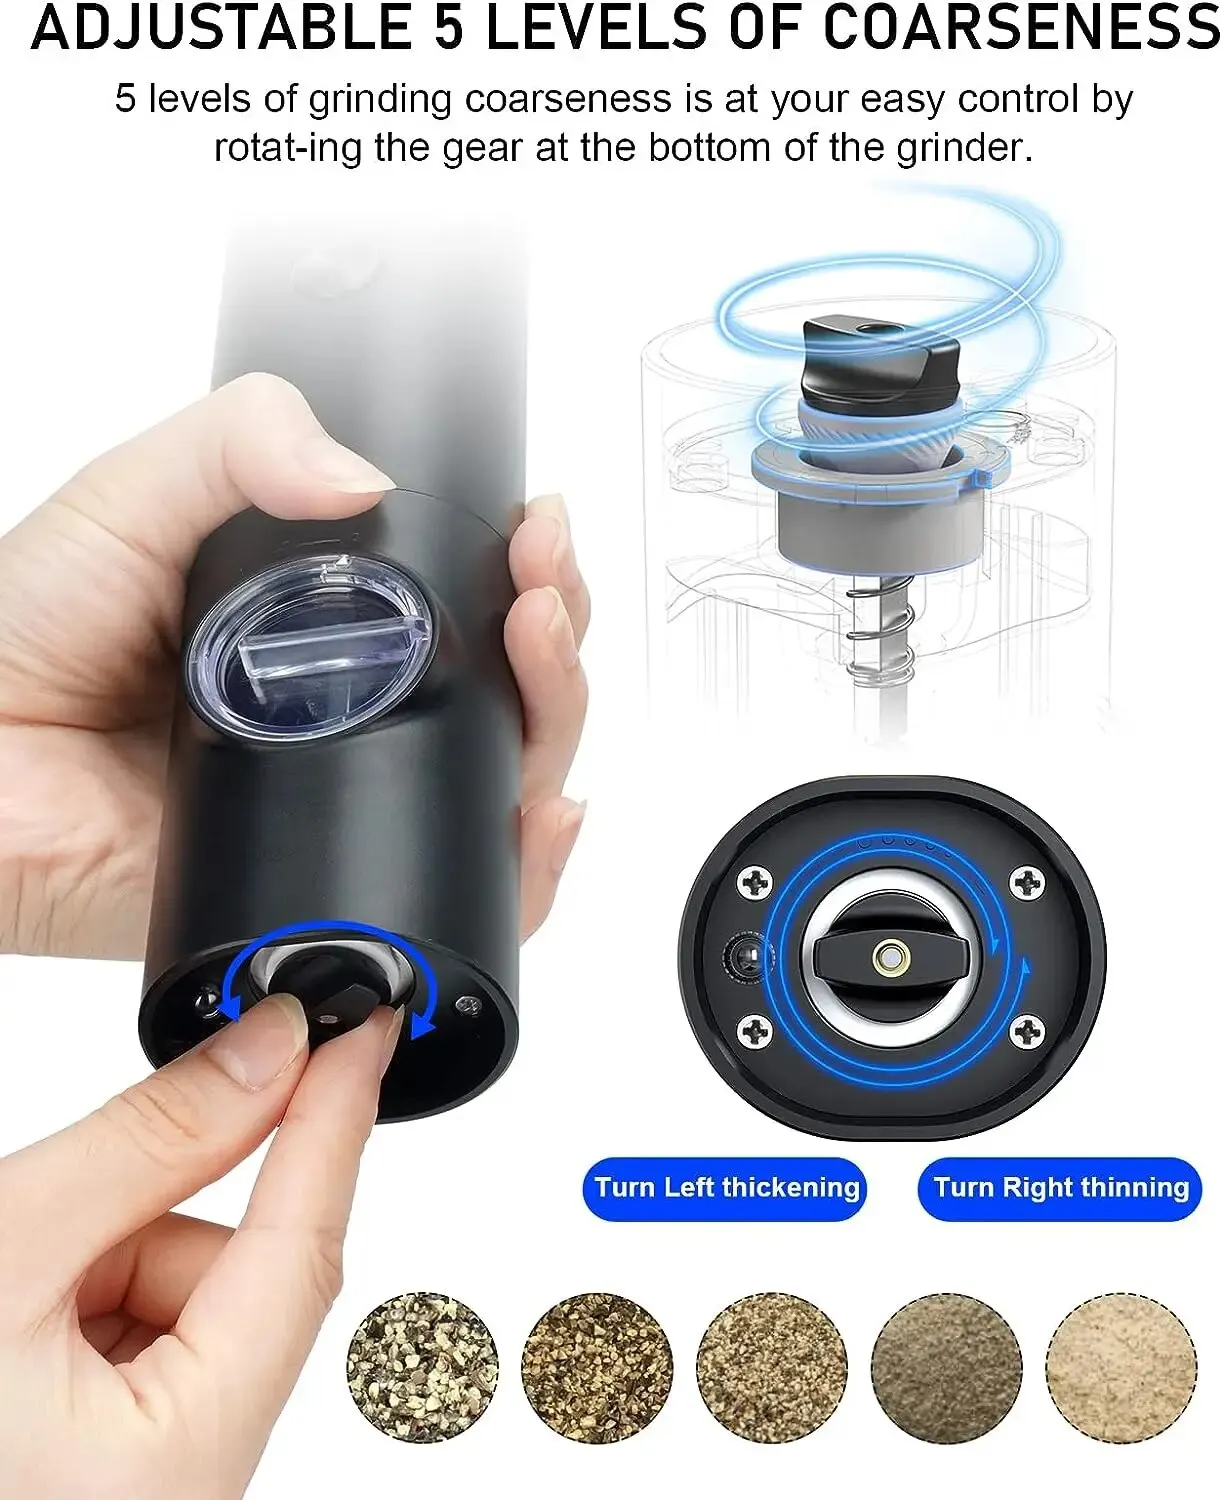 https://ae01.alicdn.com/kf/S9935ed1926104f5eb5e6b7e9872b6d93k/2Pcs-Electric-Salt-And-Pepper-Grinder-With-Adjustable-Coarseness-Refillable-Mill-Battery-Powered-Kitchen-Automatic-Gadget.jpg